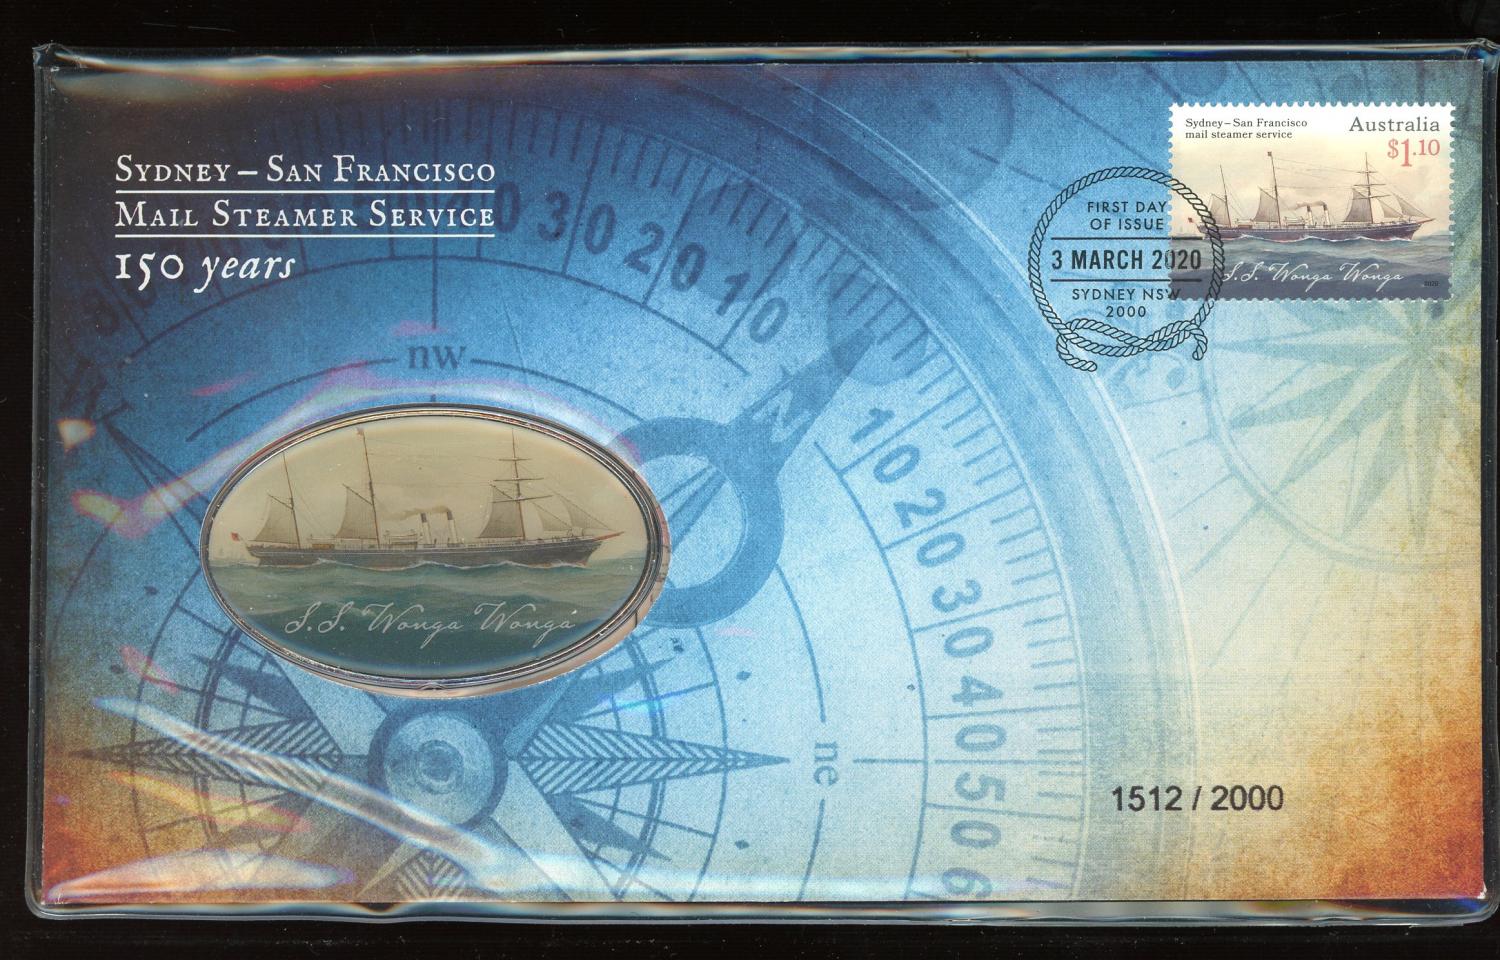 Thumbnail for 2020 Sydney - San Francisco Mail Steamer Service 150 Years Medallic PNC